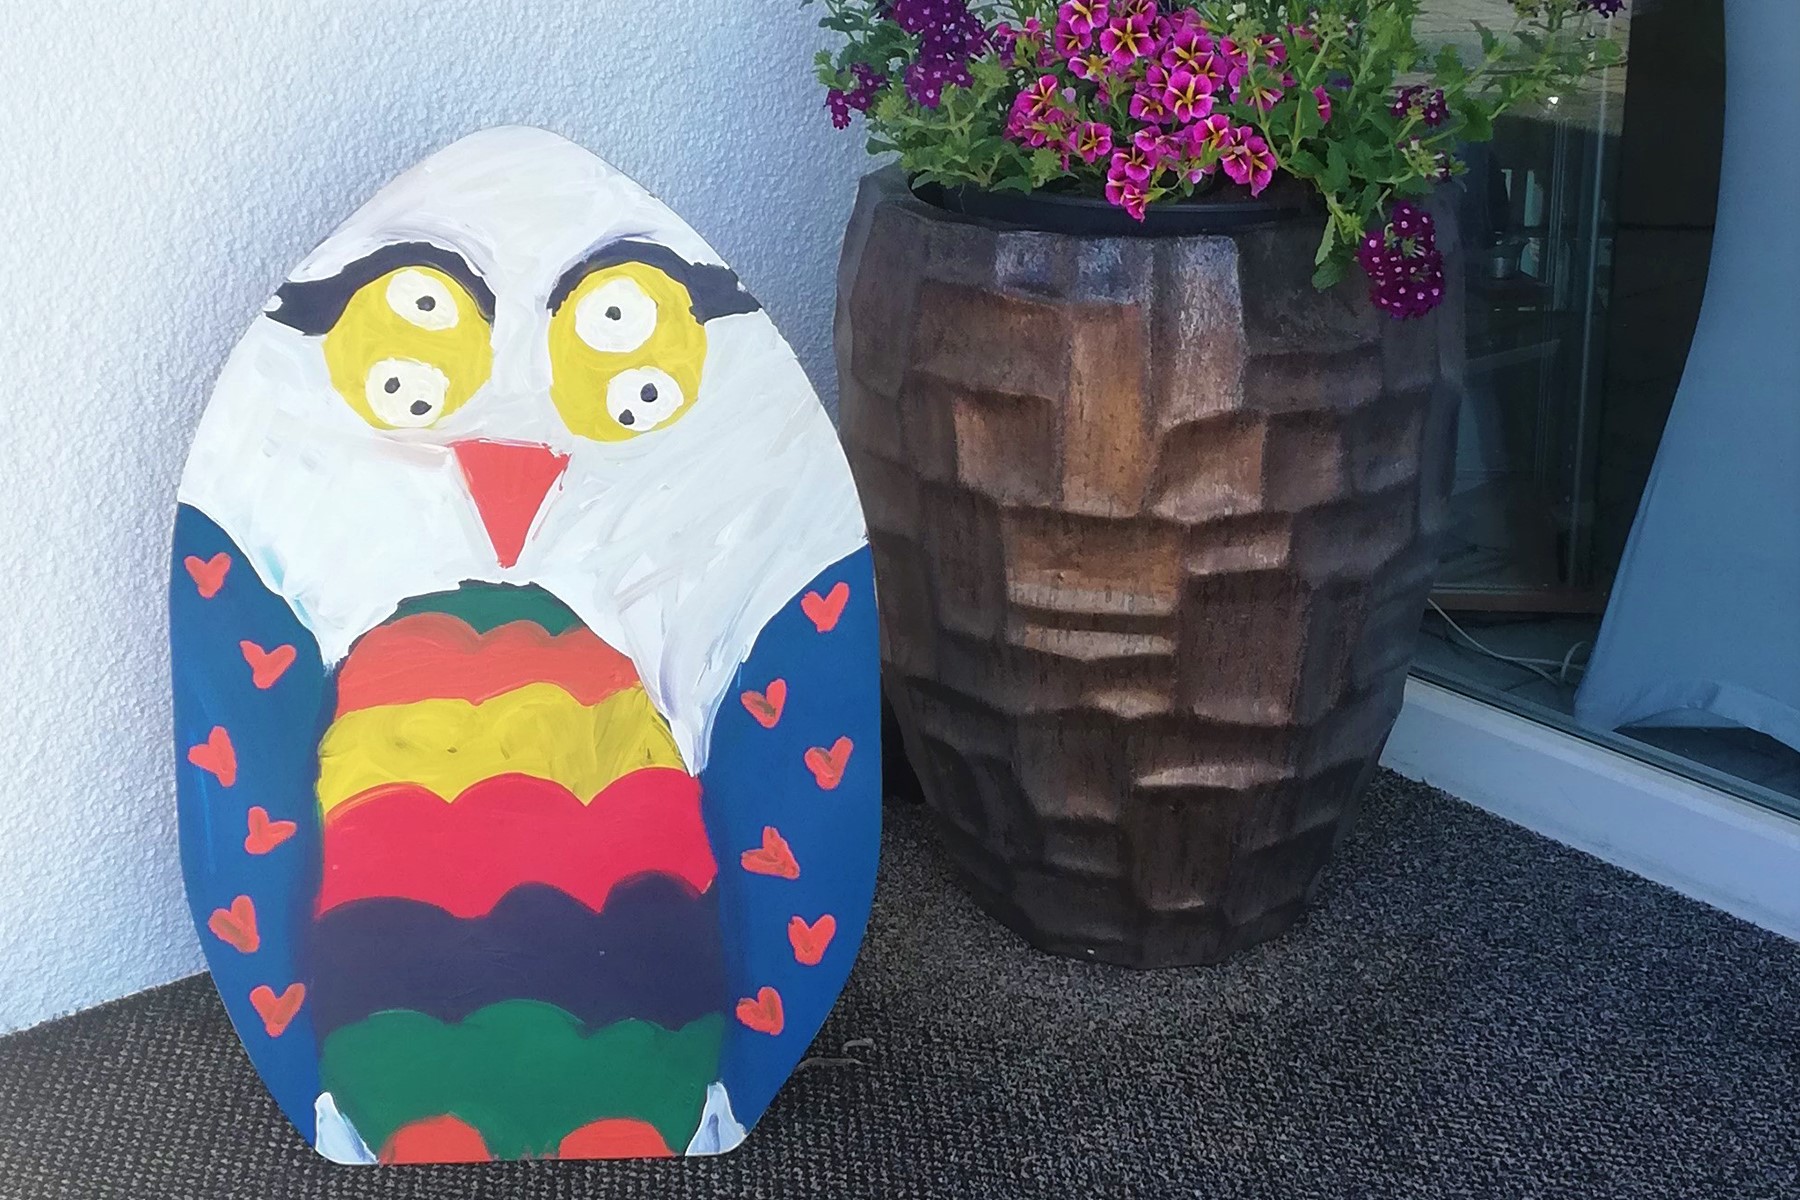 A colorfully painted wooden panel in the shape of an owl standing at the main entrance in Villach.